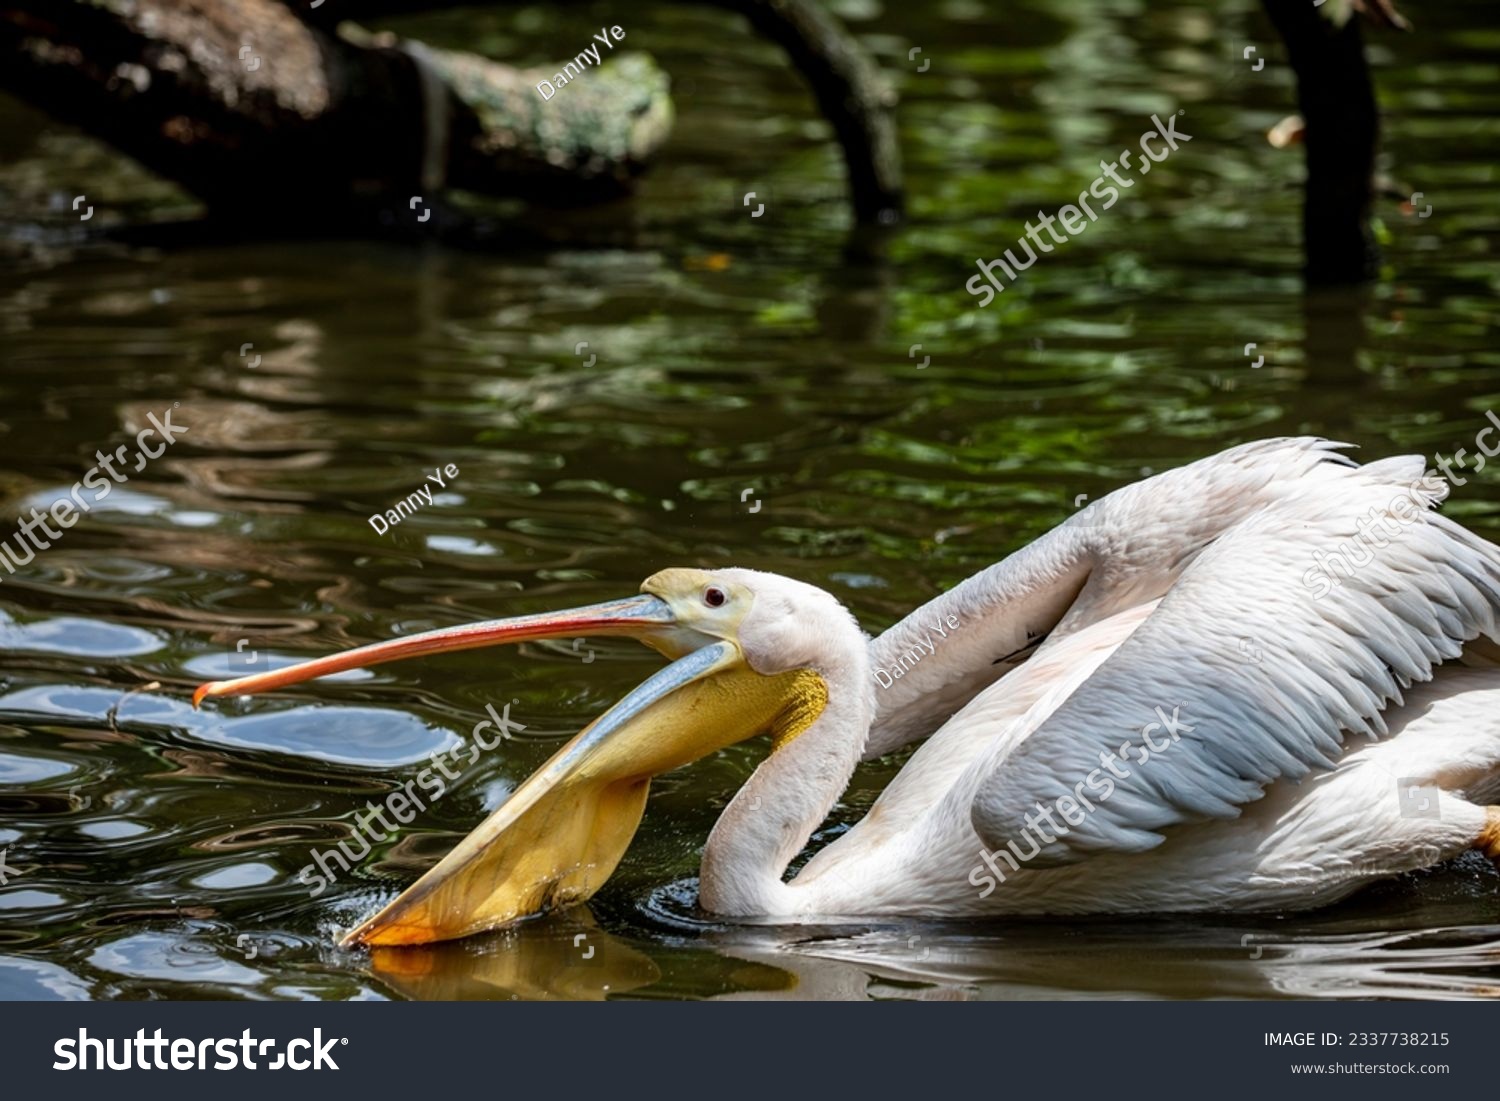 The great white pelican (Pelecanus onocrotalus) open the beak. It is a bird in the pelican family. It breeds from southeastern Europe through Asia and Africa, in swamps and shallow lakes. #2337738215